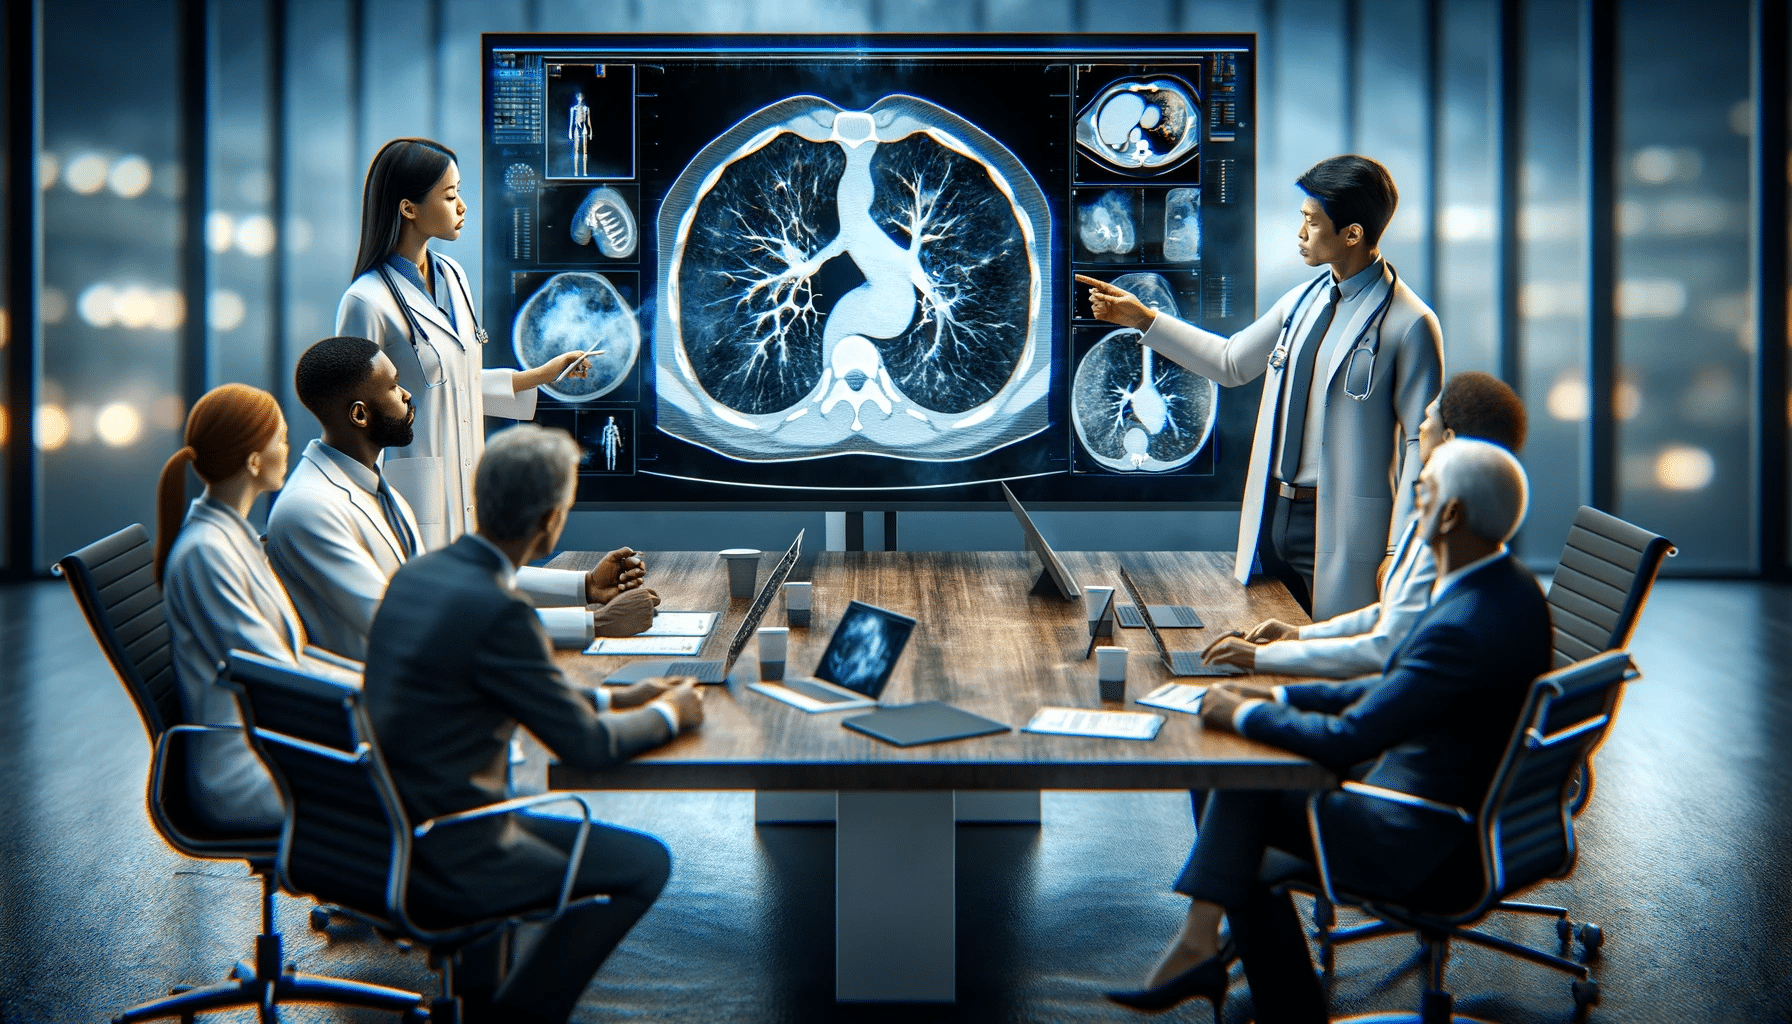 A group of people sitting around a table with an x-ray image on the screen.